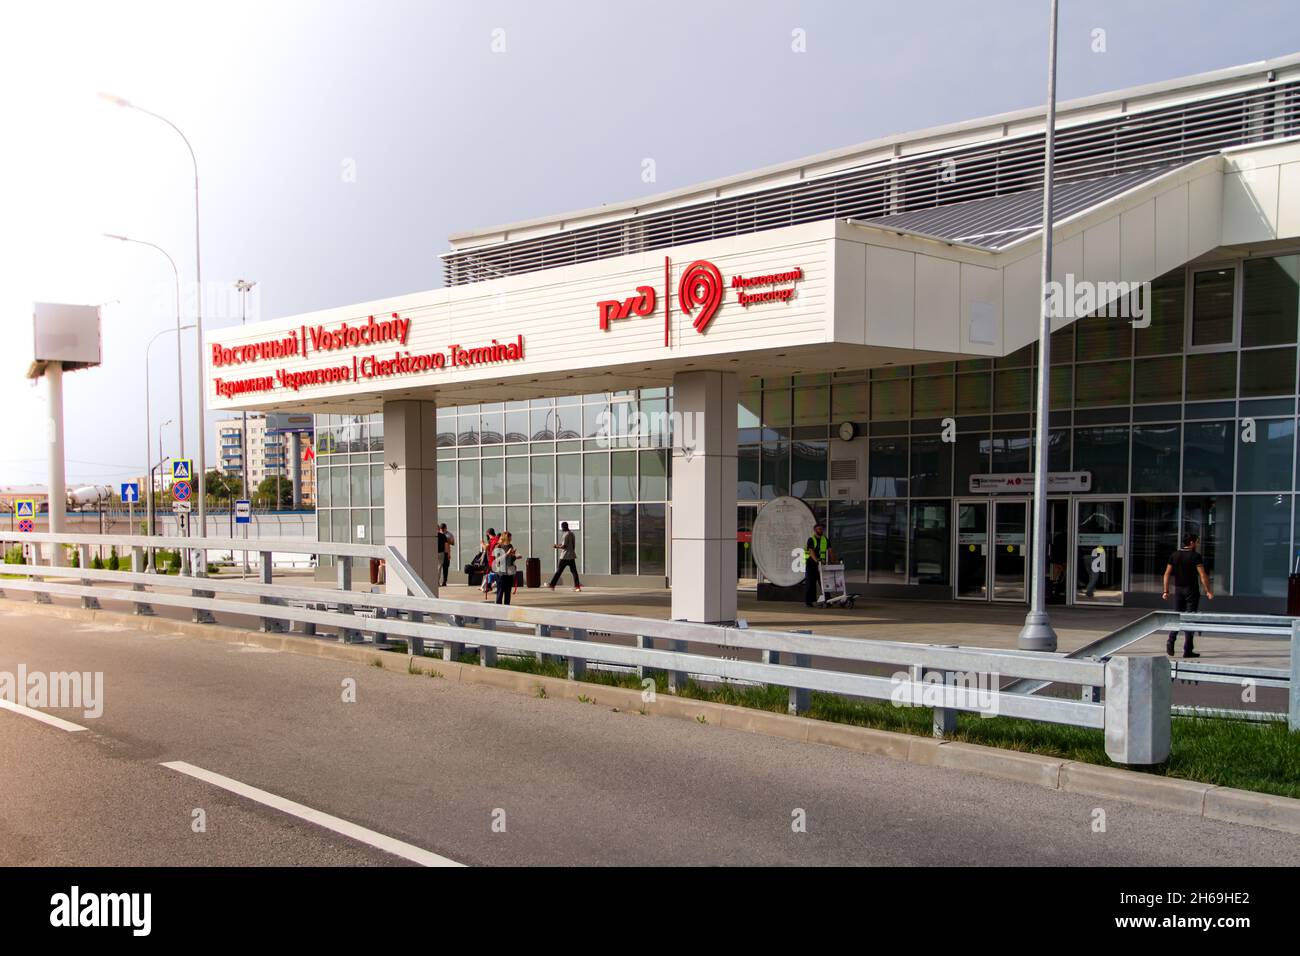 MOSCOW, RUSSIA - AUGUST 21, 2021 Main entrance of Moscow Vostochny railway station also called Cherkizovo or Eastern railway terminal. People are wait Stock Photo